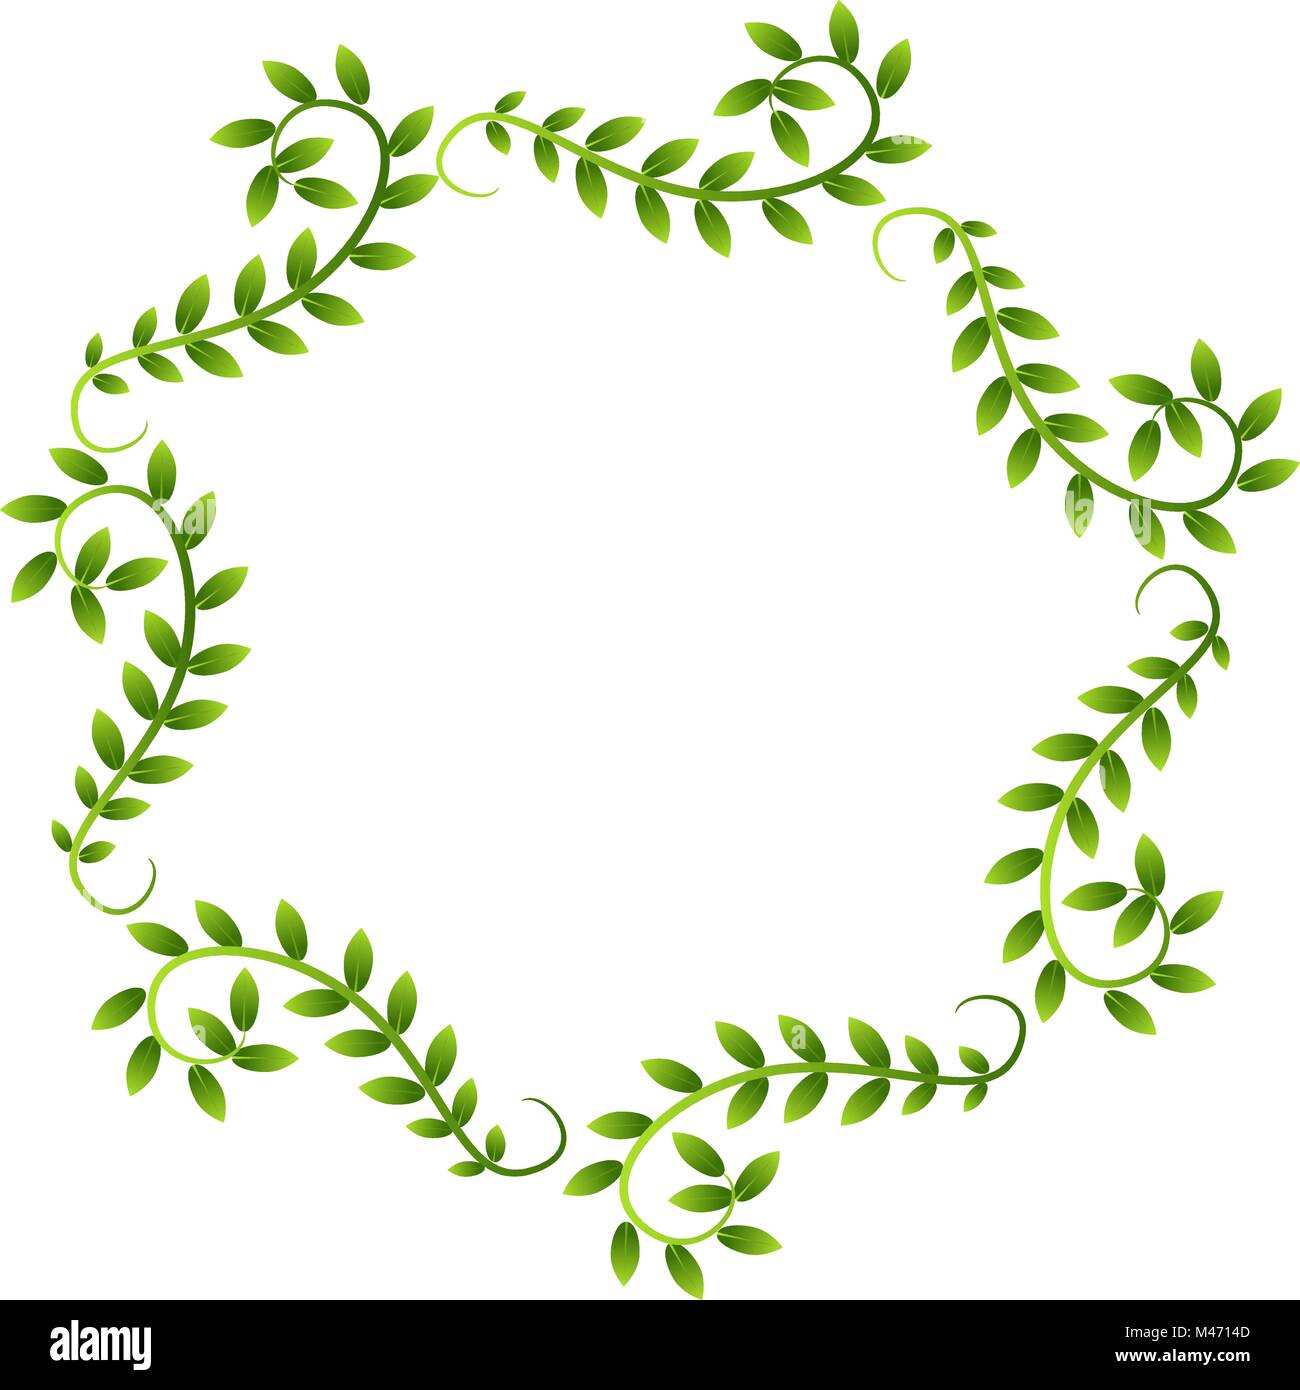 An image of a Plant Vine Leaves Frame Wreath Border isolated on white. Stock Vector